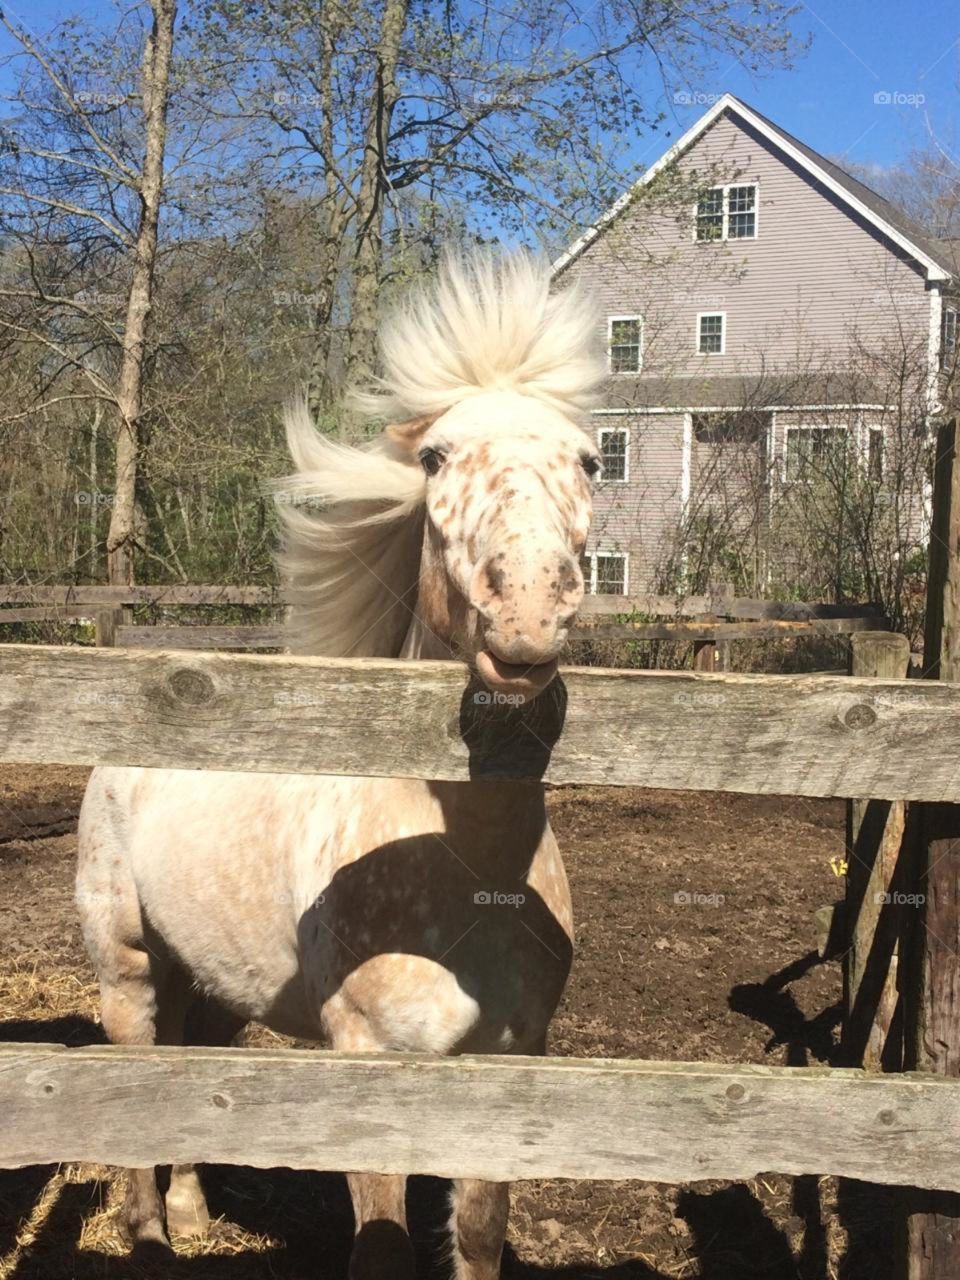 Cute spotted pony with crazy hair on a windy day!